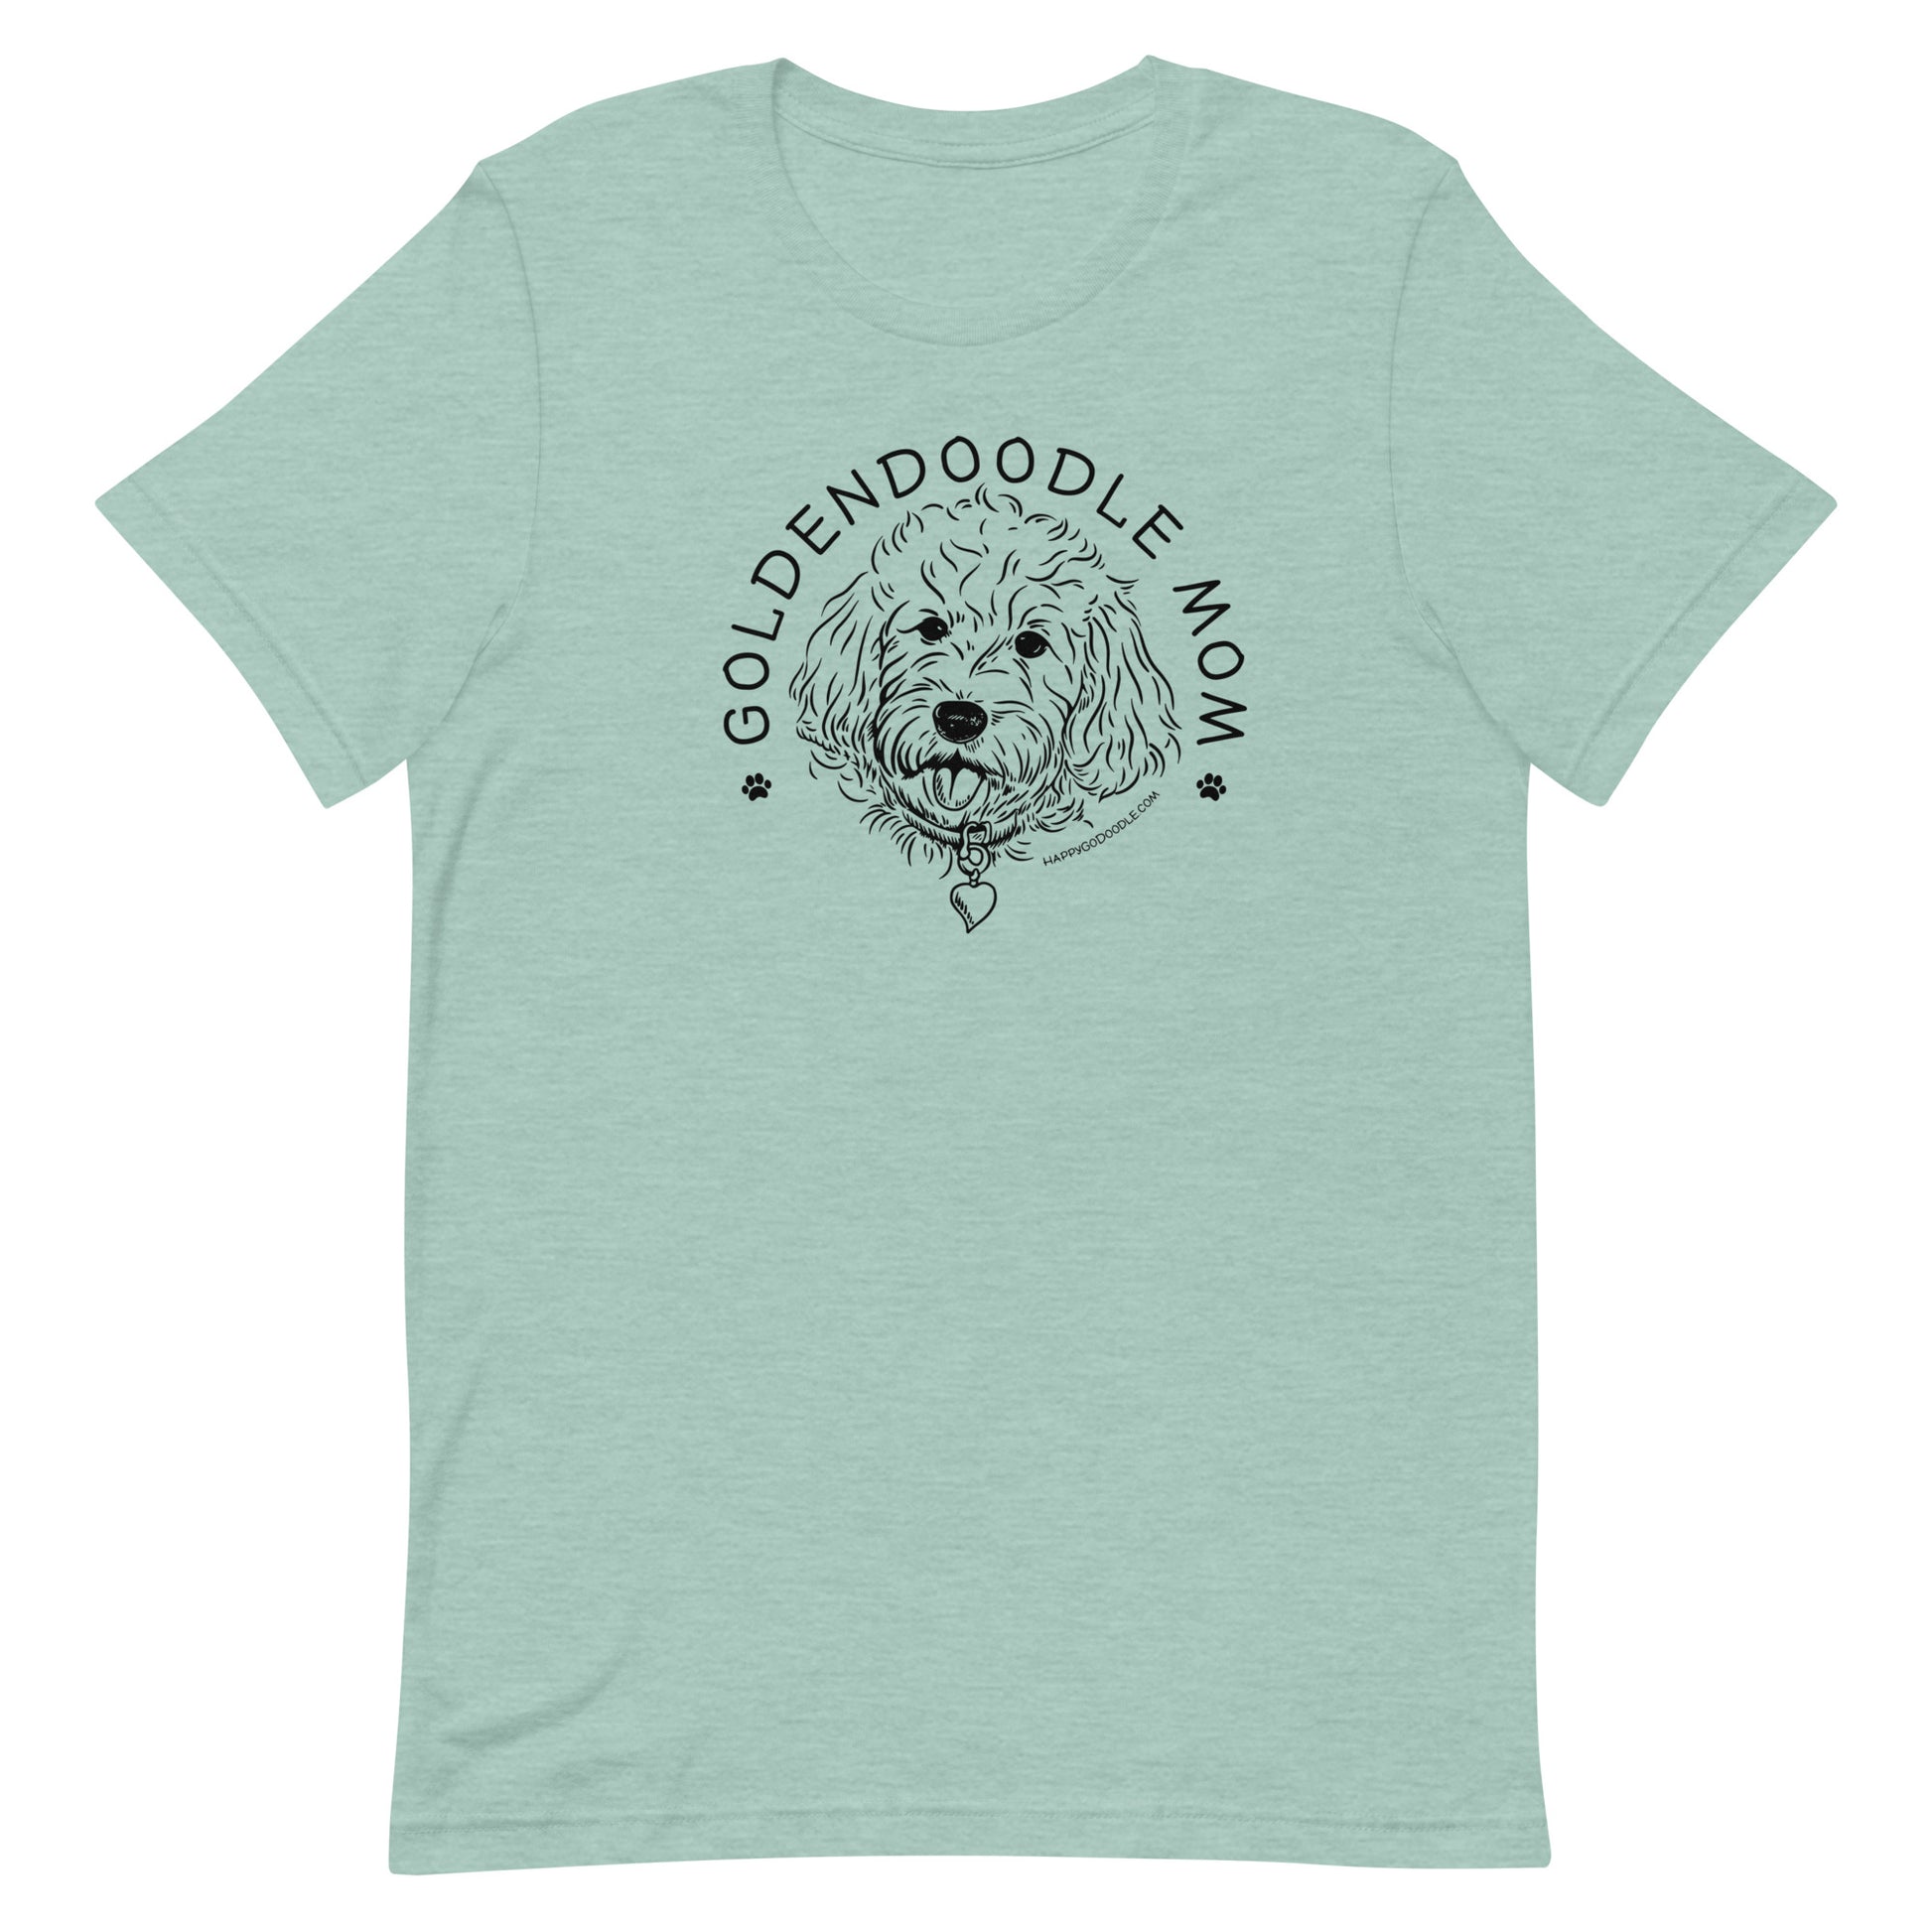 Goldendoodle Mom t-shirt with Goldendoodle face and words "Goldendoodle Mom" in heather prism dusty blue color